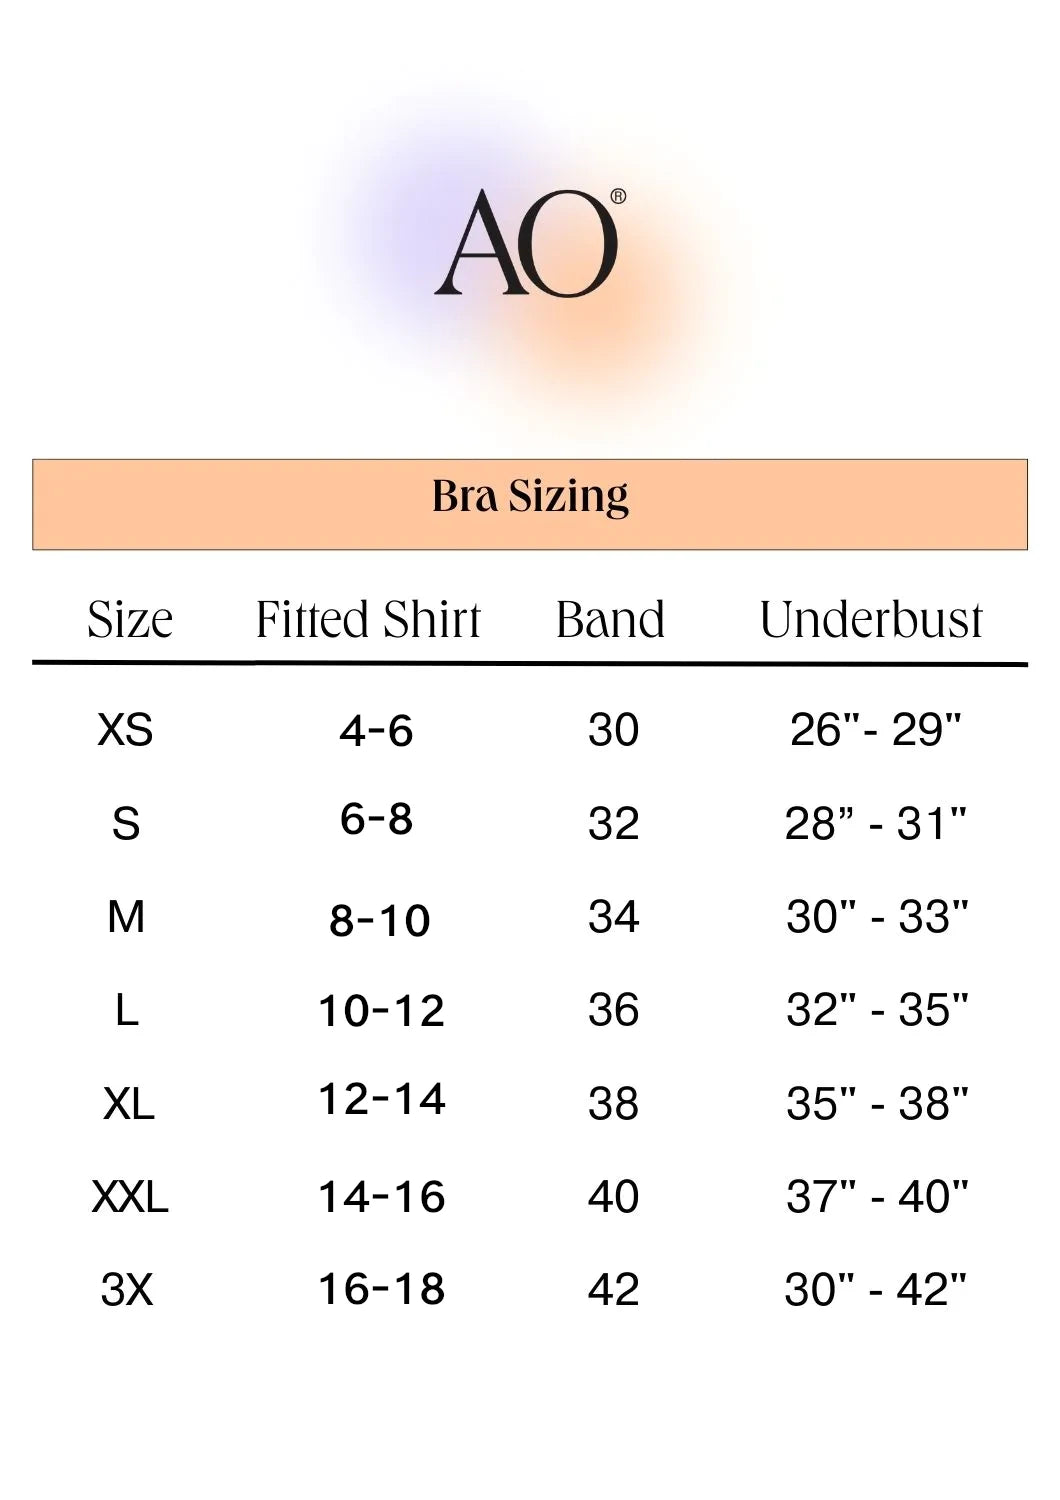 AnaOno Rachel Unilateral Molded Left Cup Bra AO-092L – My Top Drawer